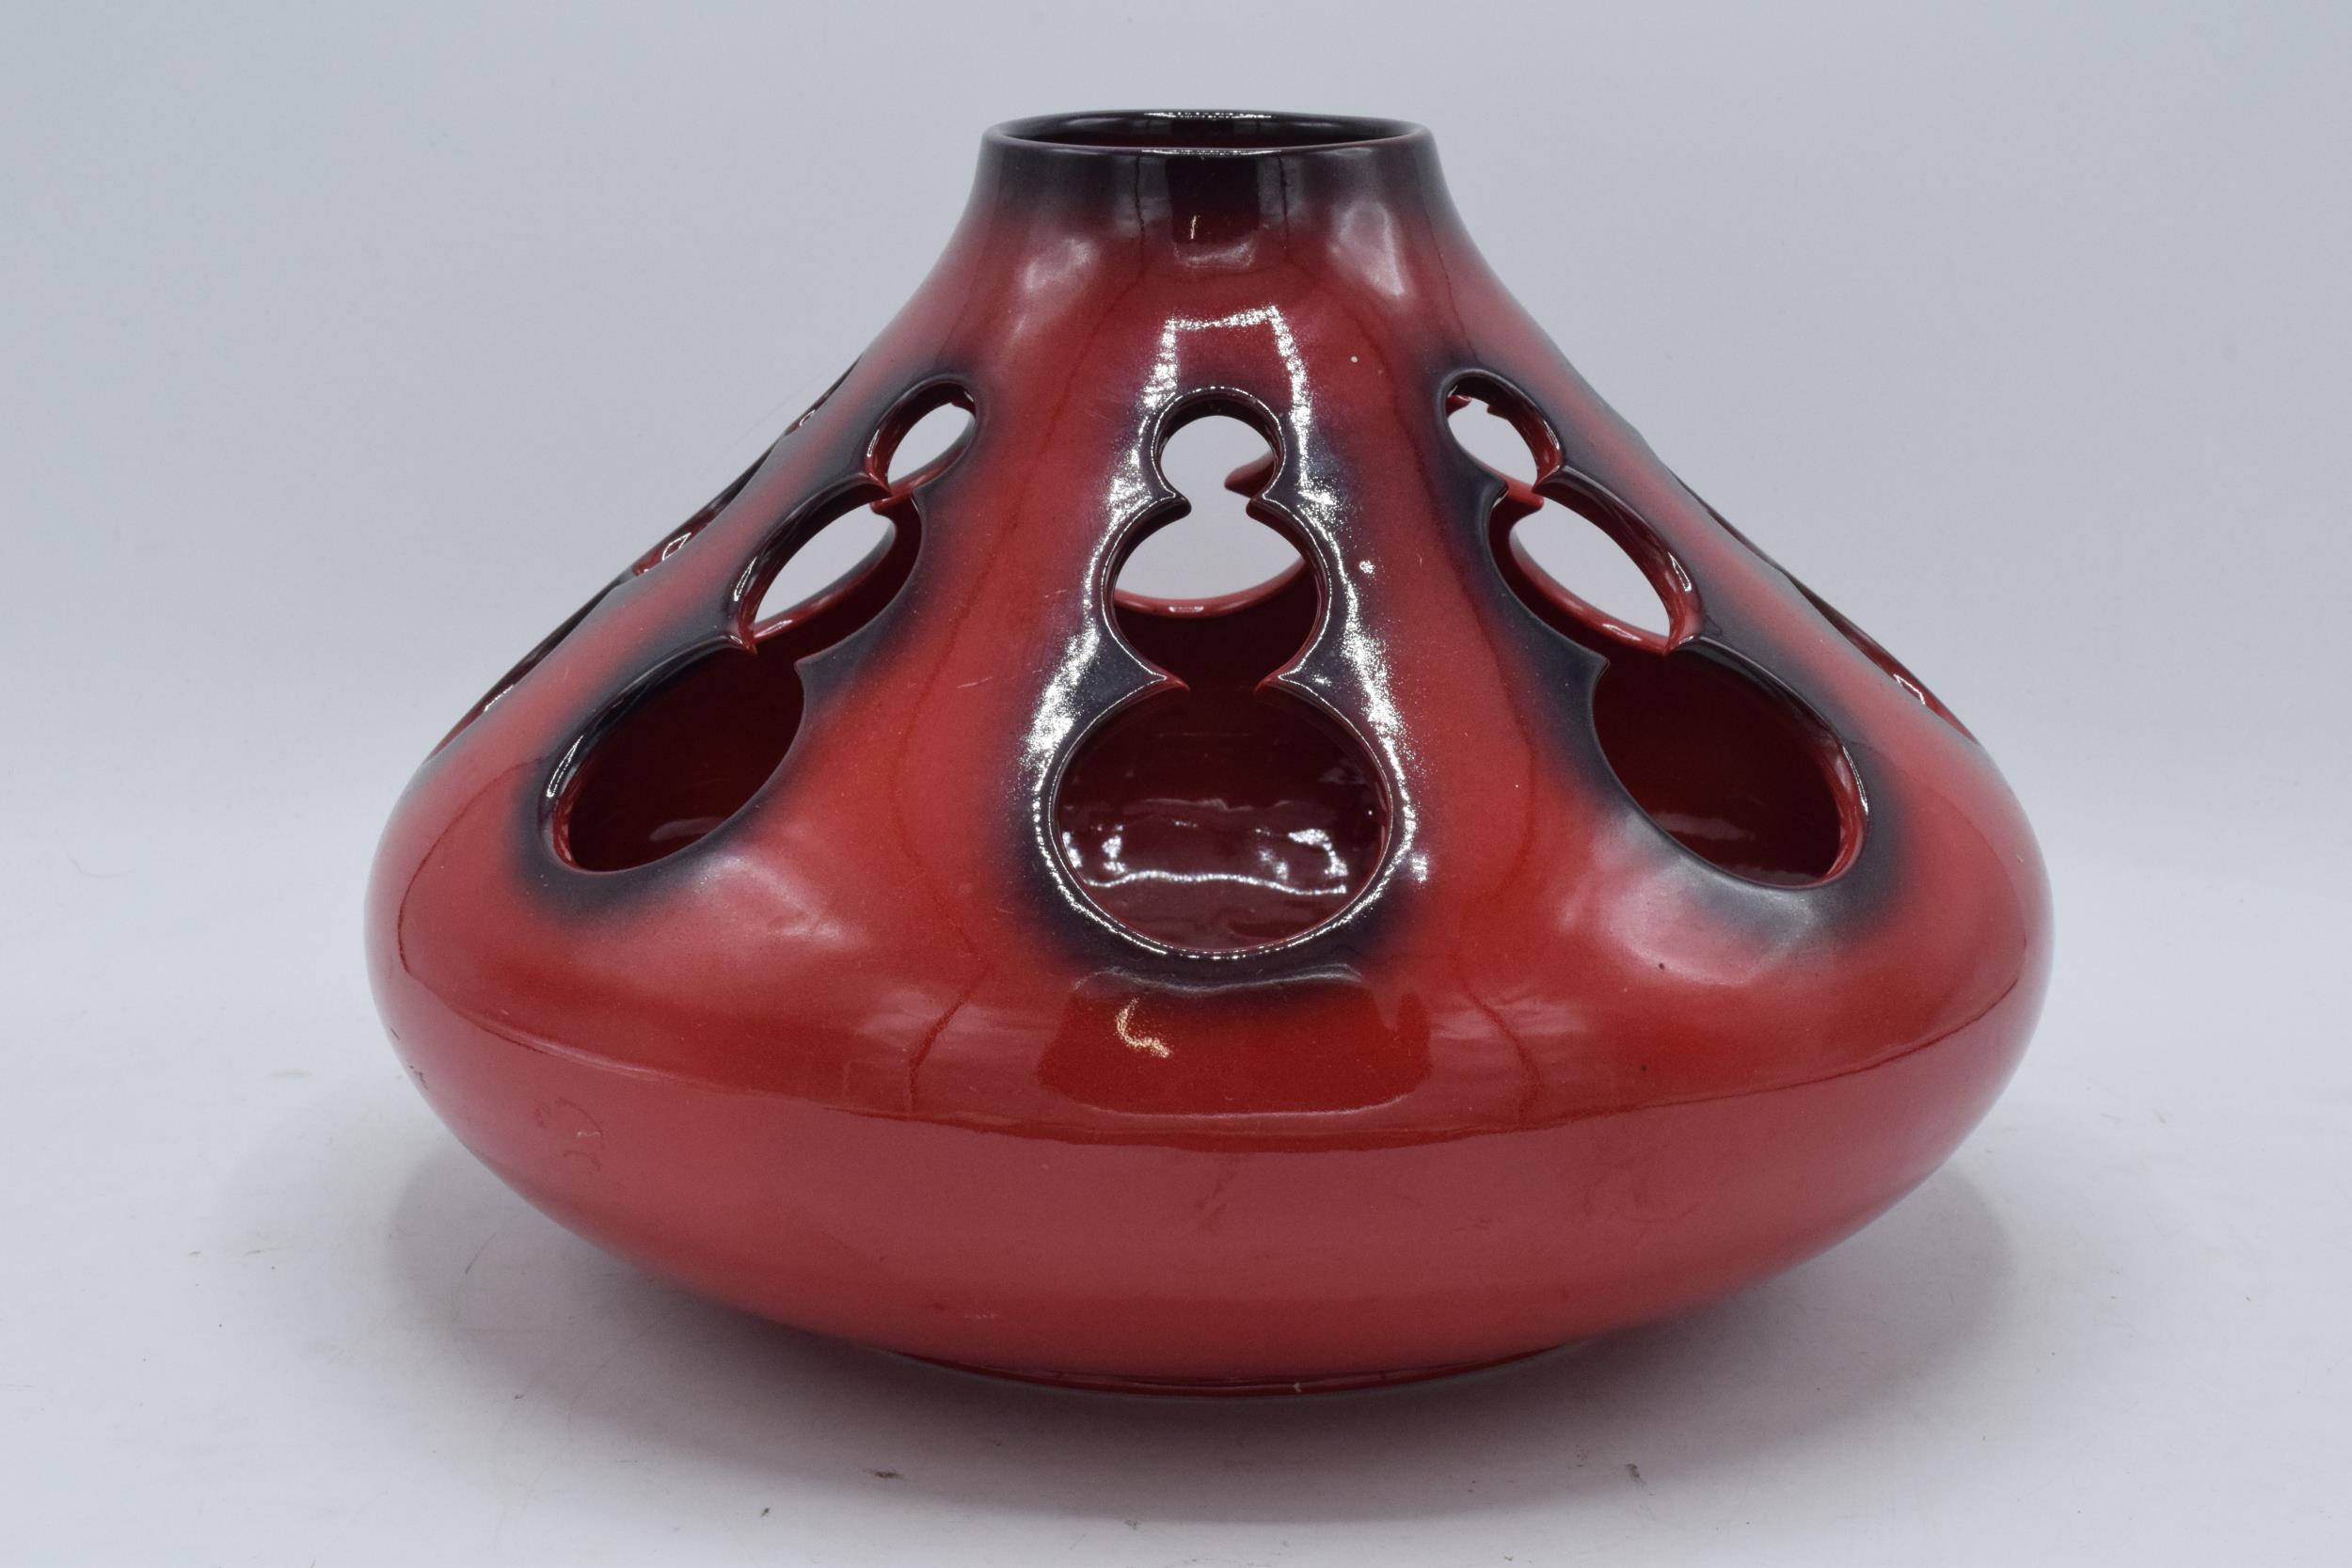 Peggy Davies Ceramics Ruby Fusion prototype vase by Artist John Brown (hard to produce due to